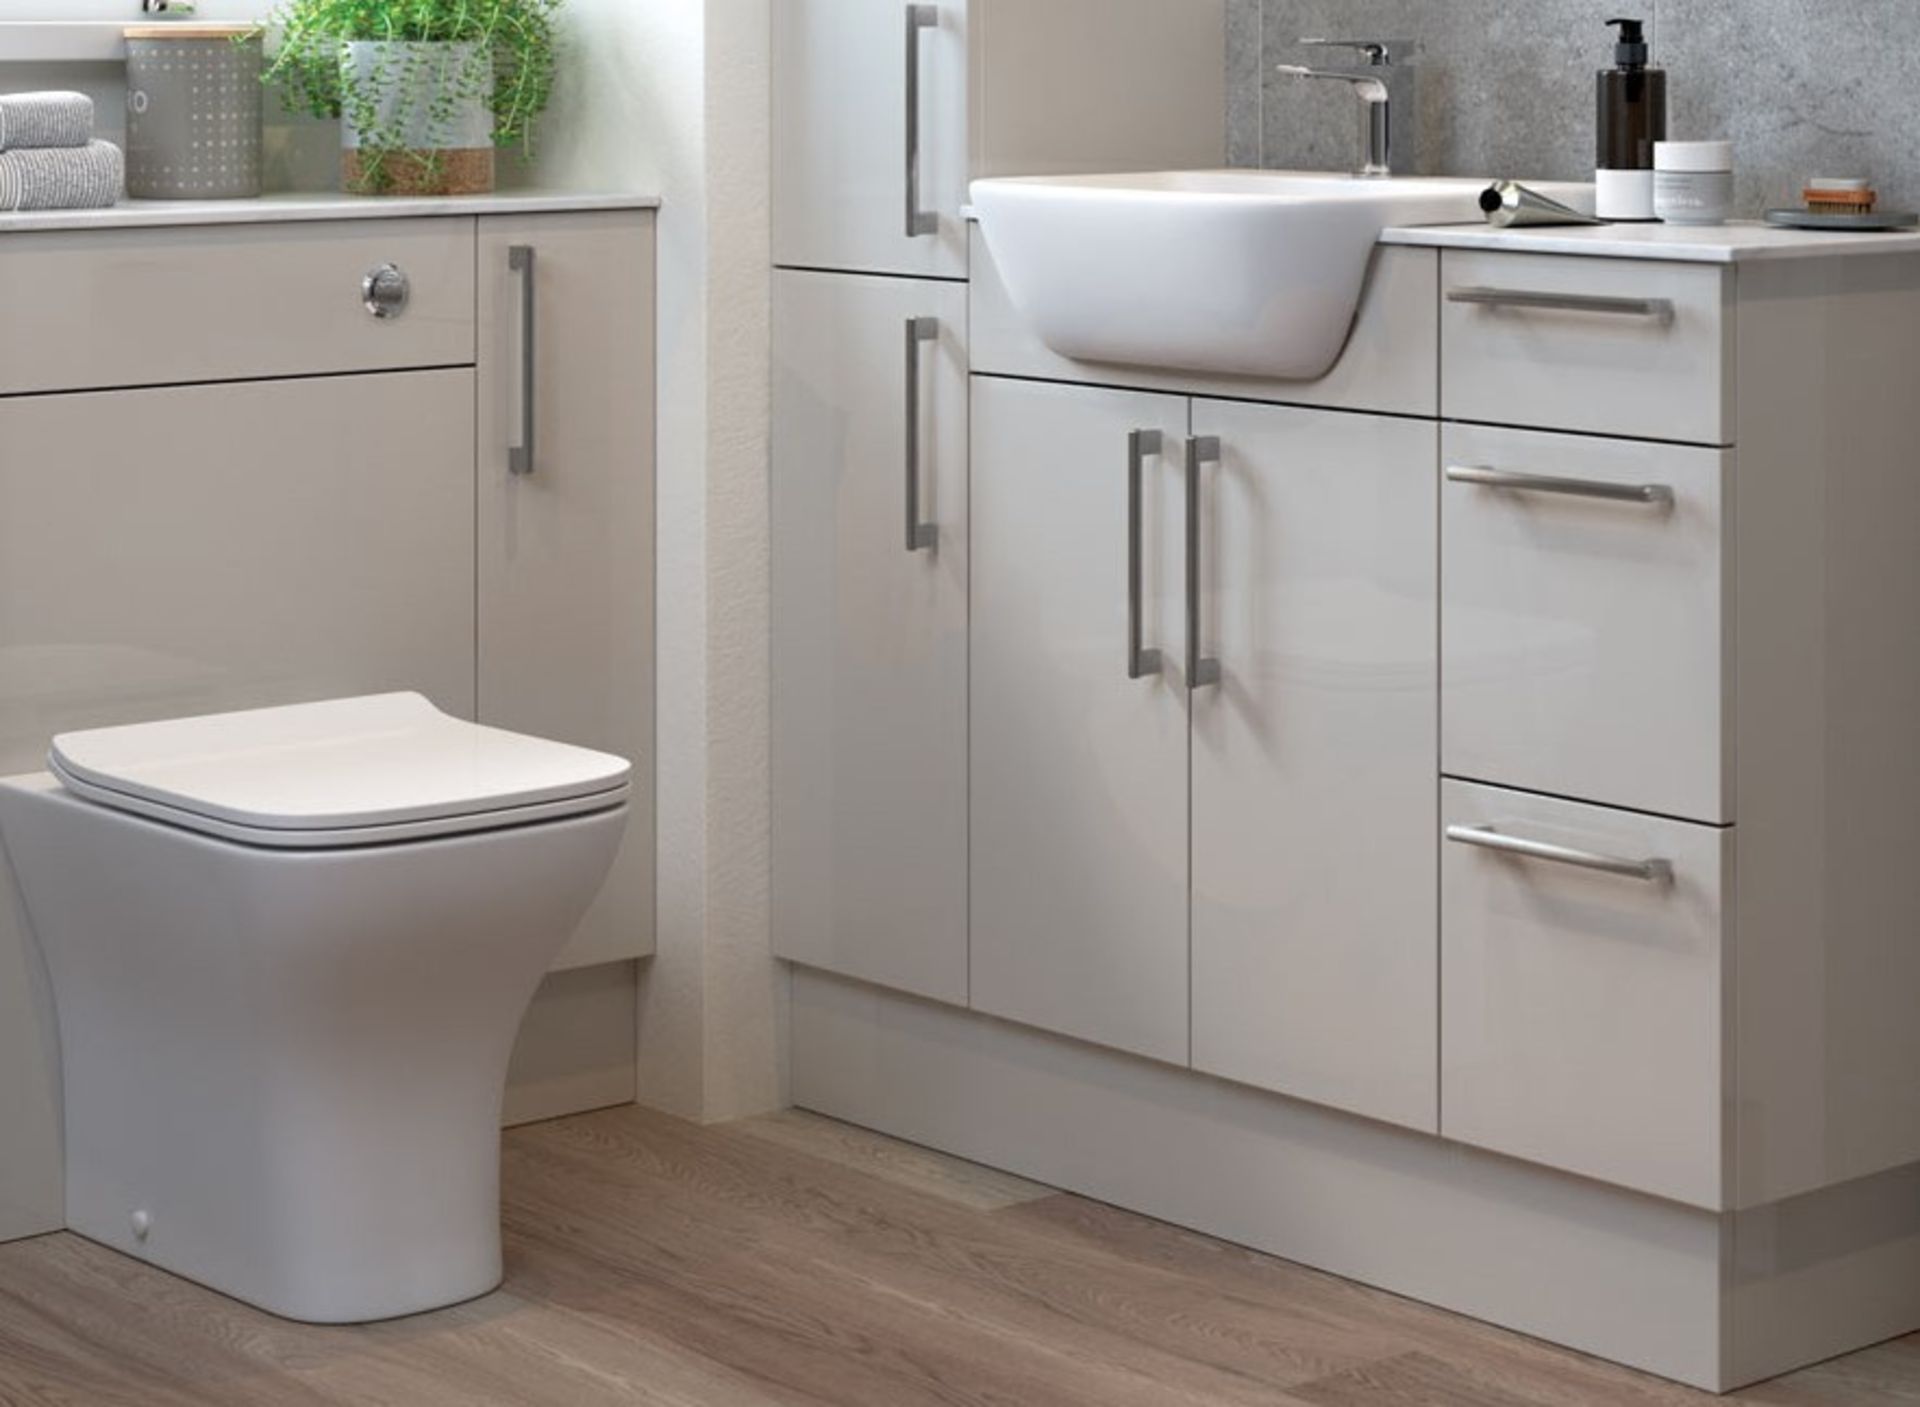 NEW (G153) Alba Light Grey Gloss 600mm Vanity Unit. RRP £455.00. Comes complete with basin. D...